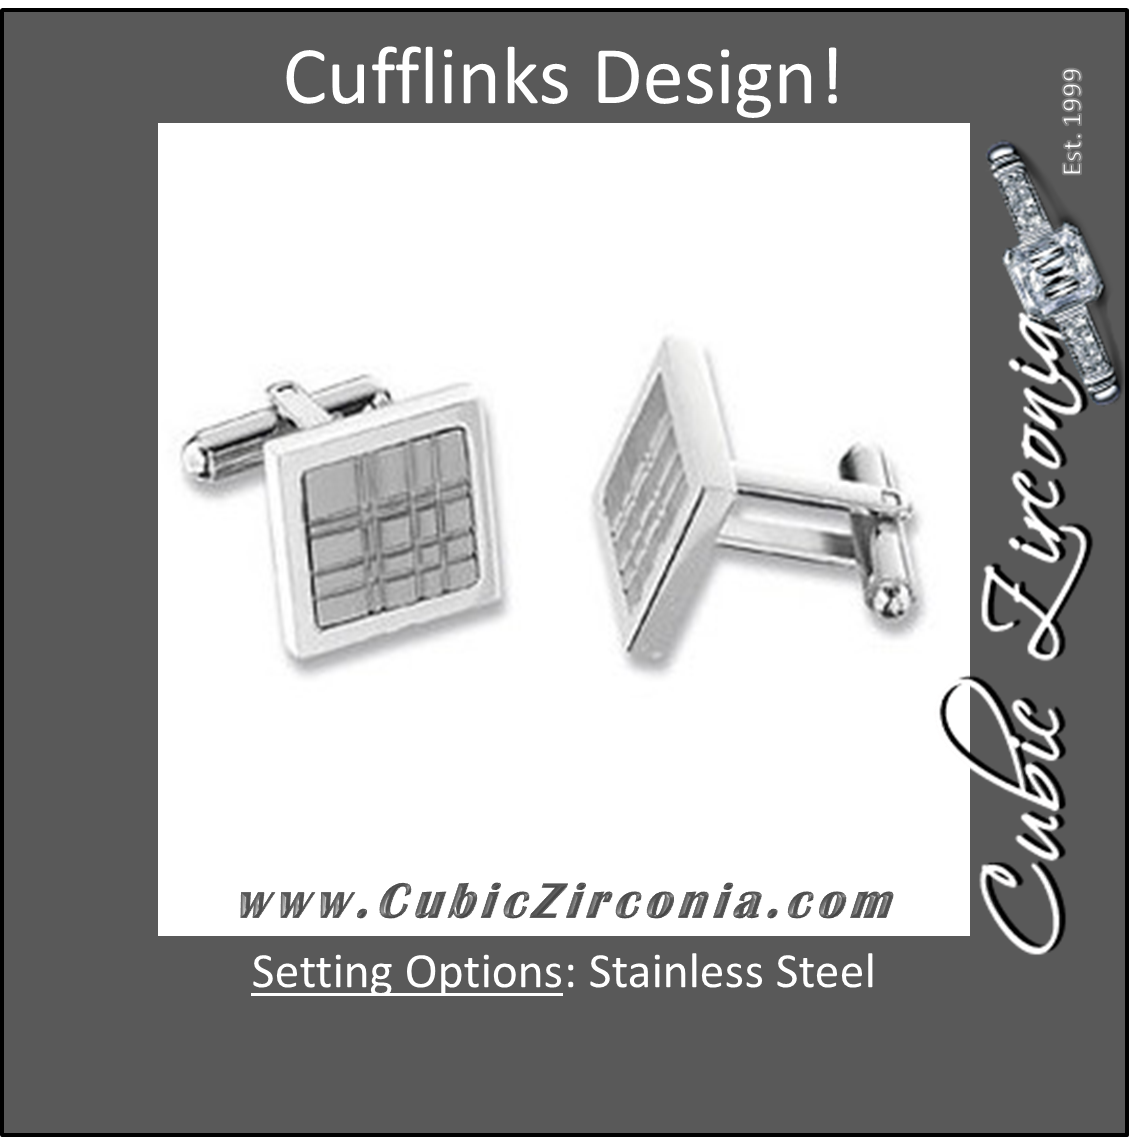 Men’s Cufflinks- Stainless Steel Square with Cross-hatched Lines Design